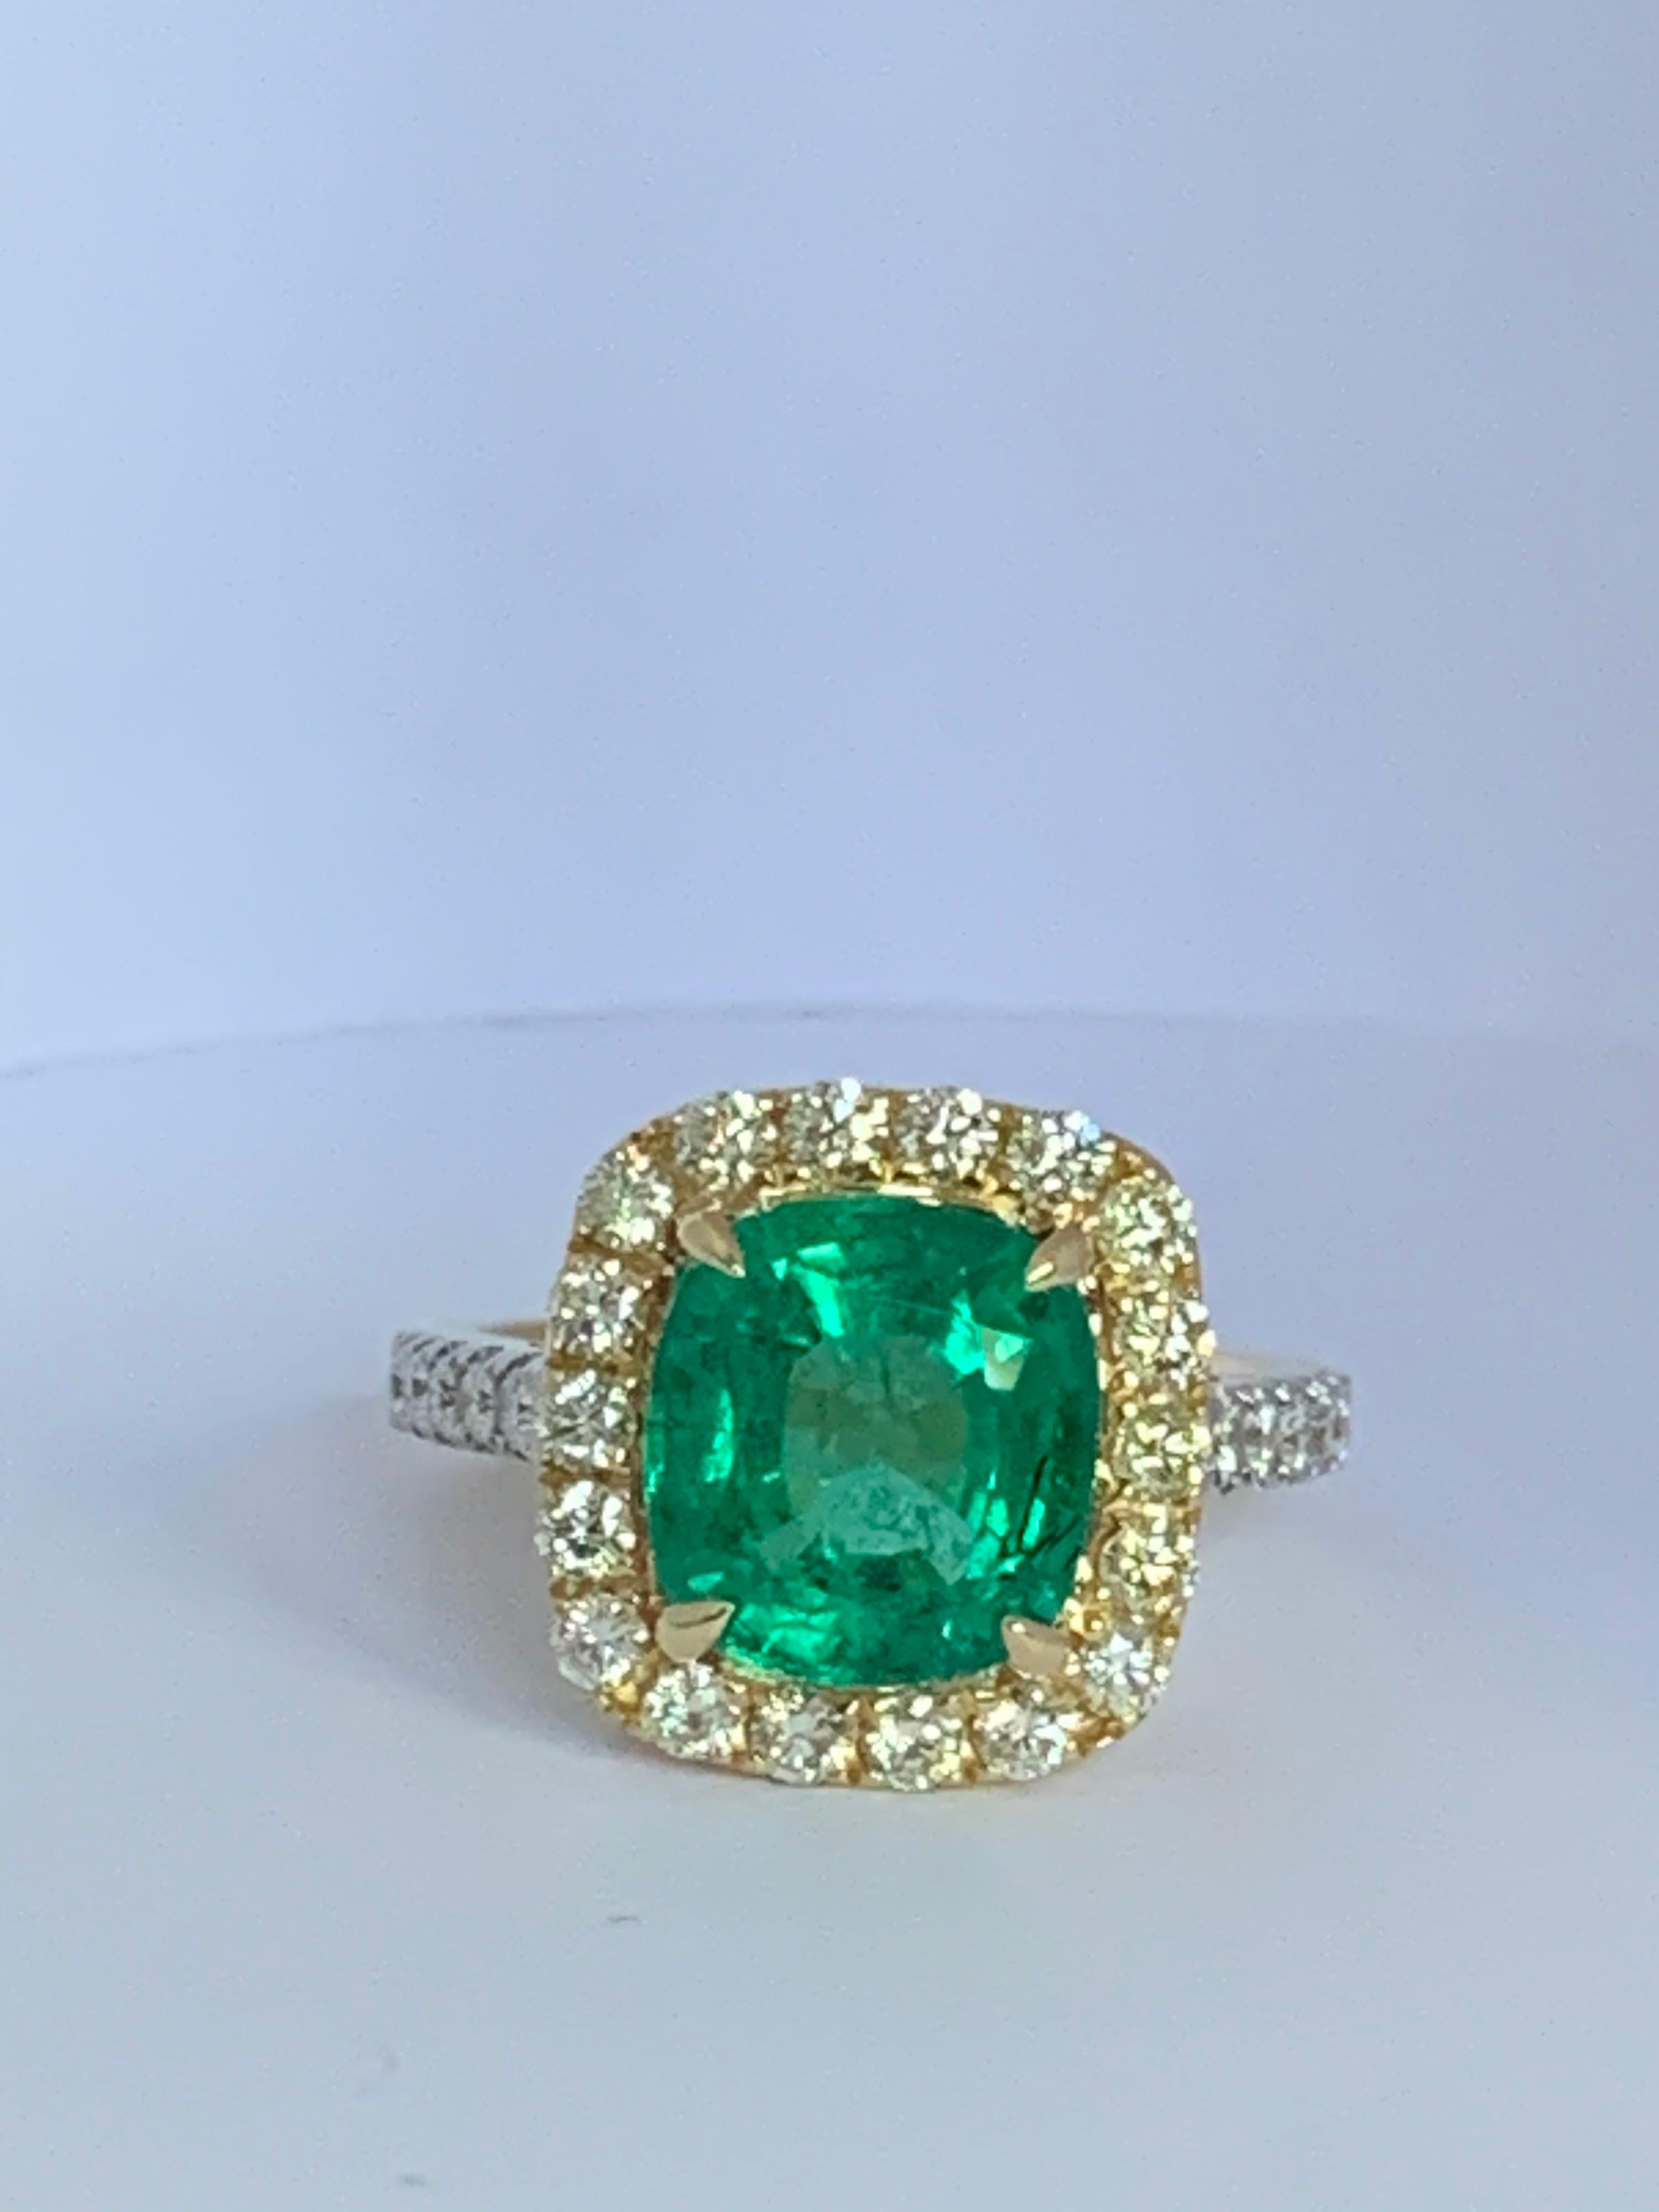 Natural Cushion shape Emerald is 3.80 Carat and Halo of Round yellow diamonds is 0.66 Carat and additional 0.21 Carat white diamond Ring is set in 18Karat Yellow Gold, The Ring is size 7 and can be resized if needed.